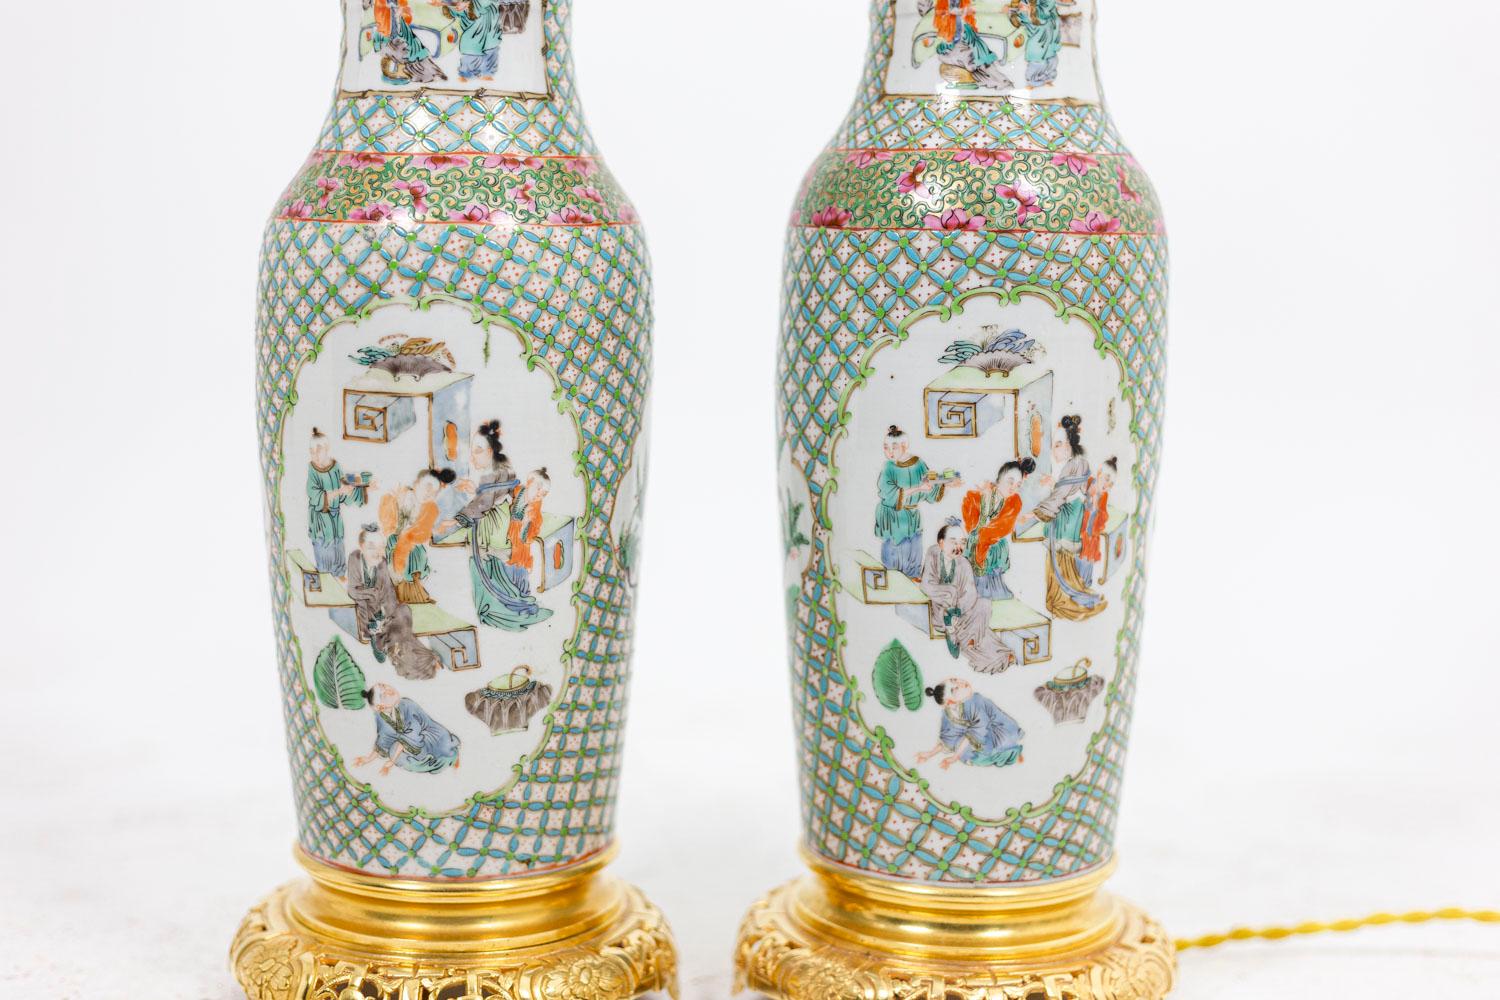 Chinese Export Pair of Lamps in Canton Porcelain and Gilt Bronze, 19th Century For Sale